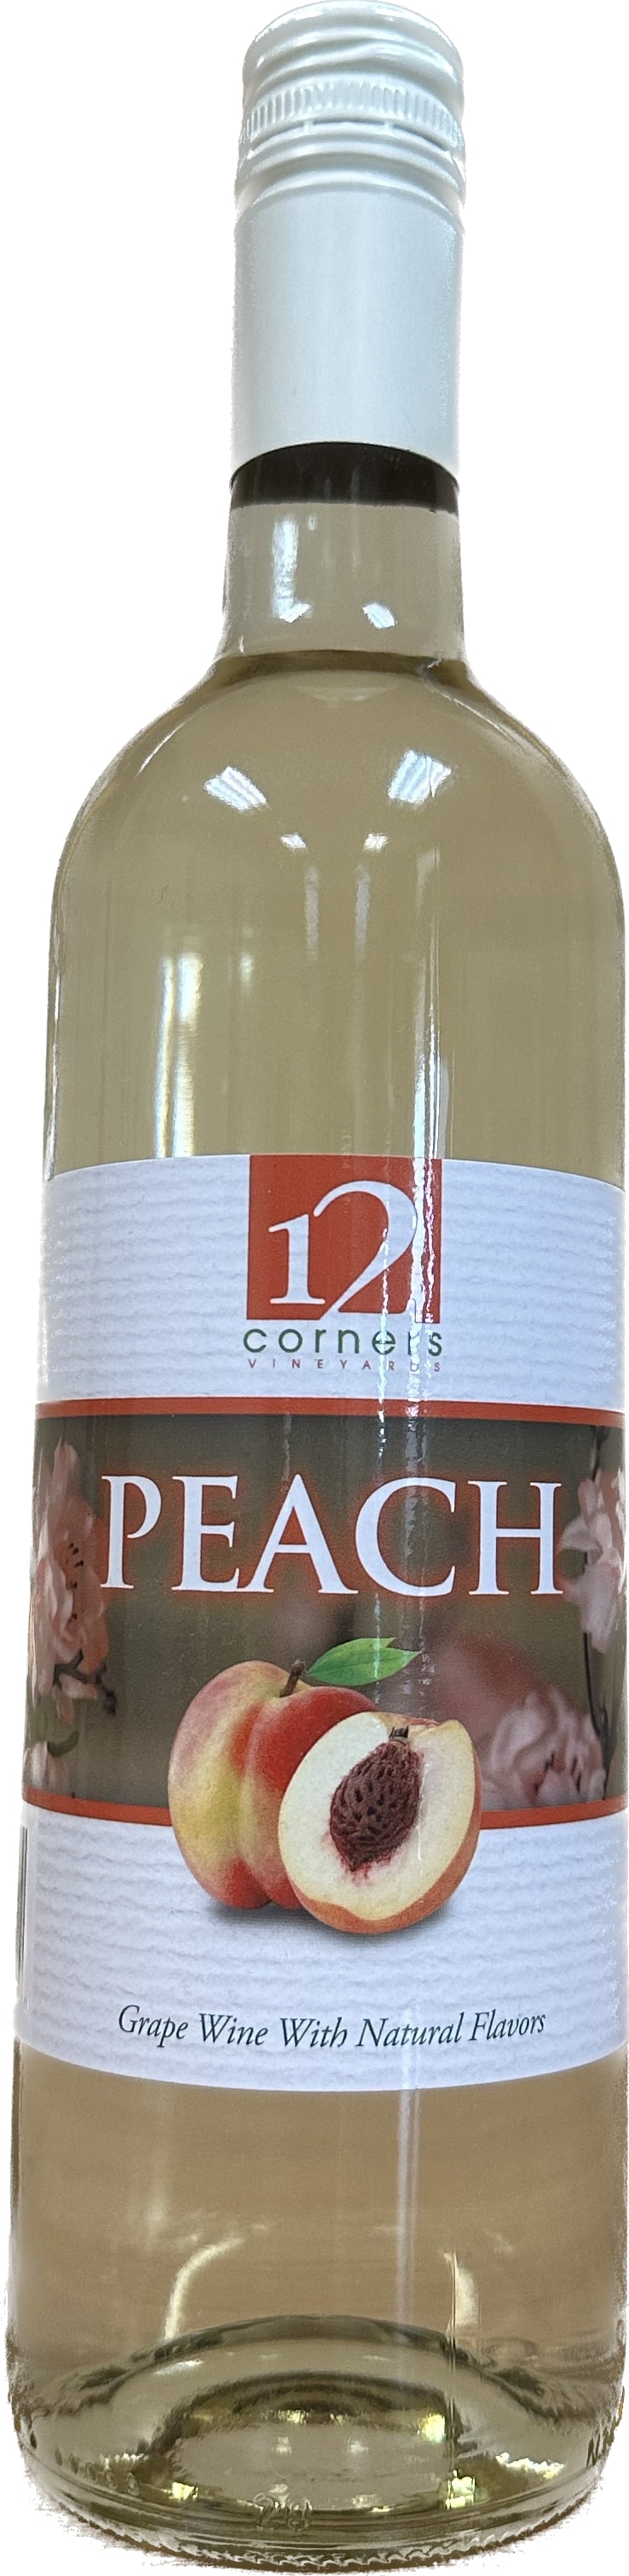 Product Image for Peach Wine